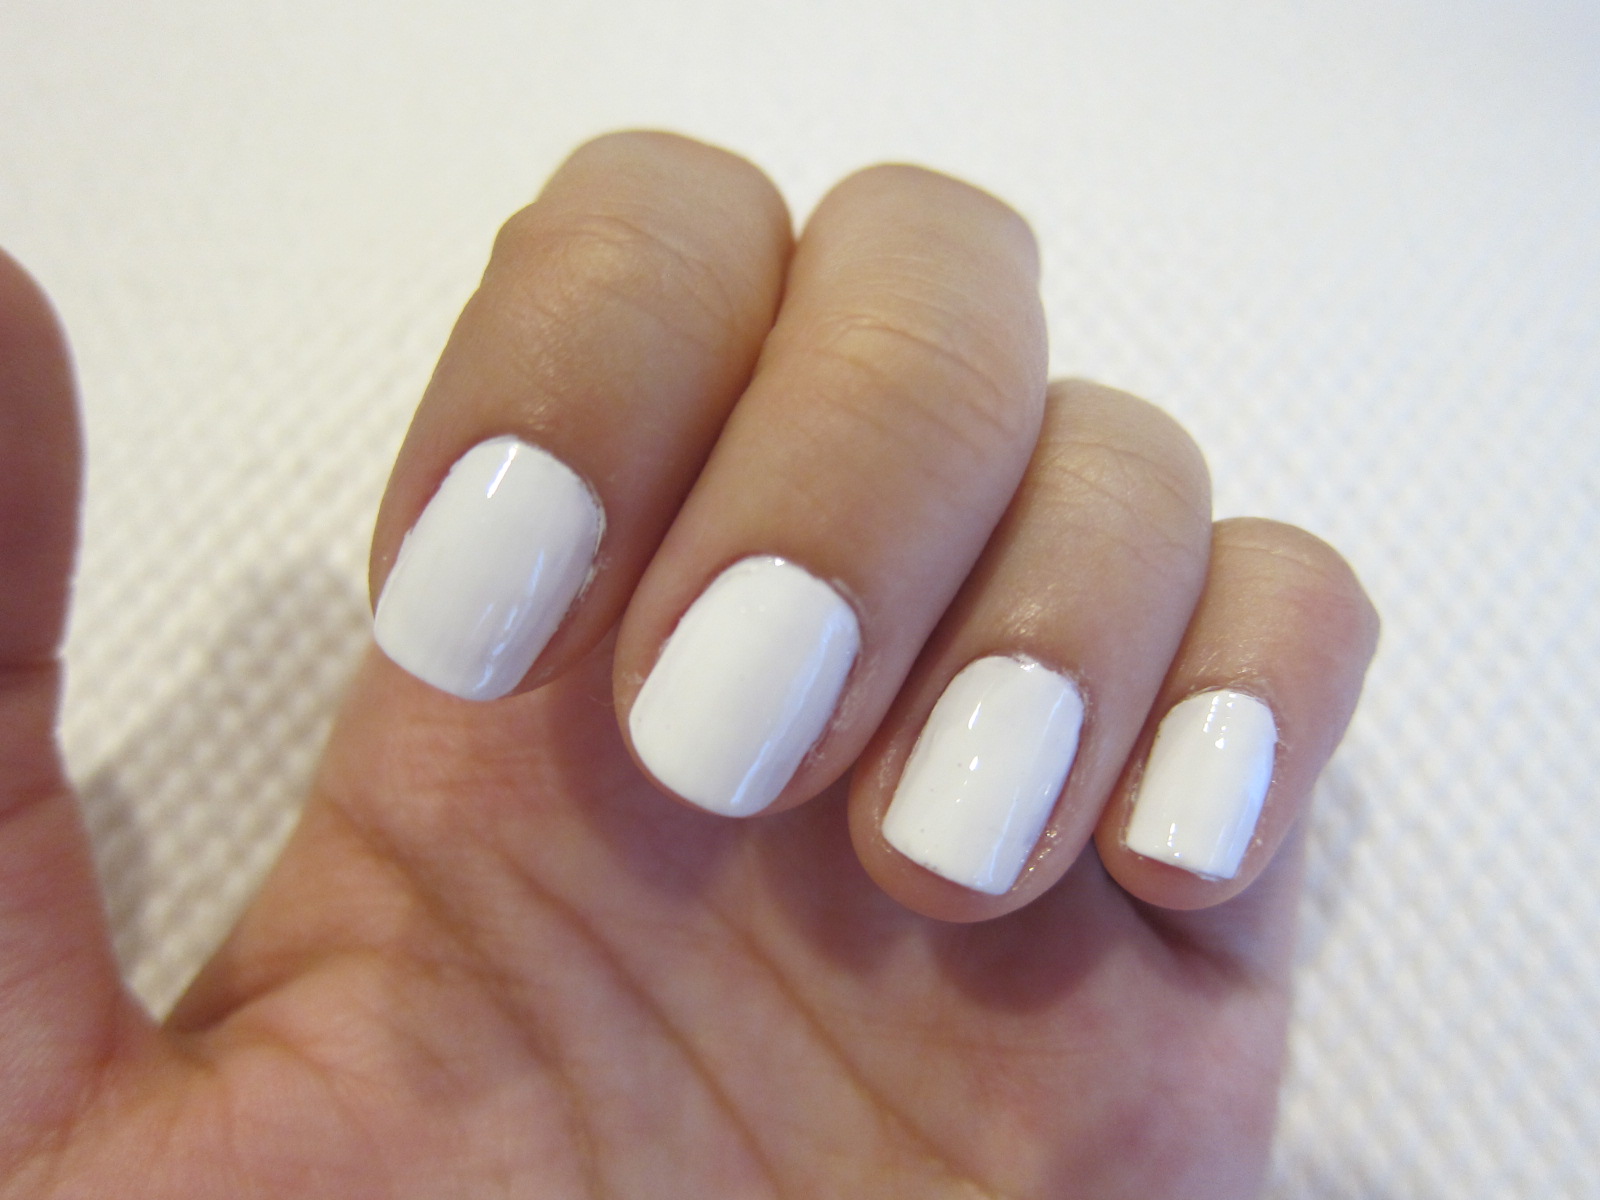 7. Orly Nail Lacquer in "White Tips" - wide 9